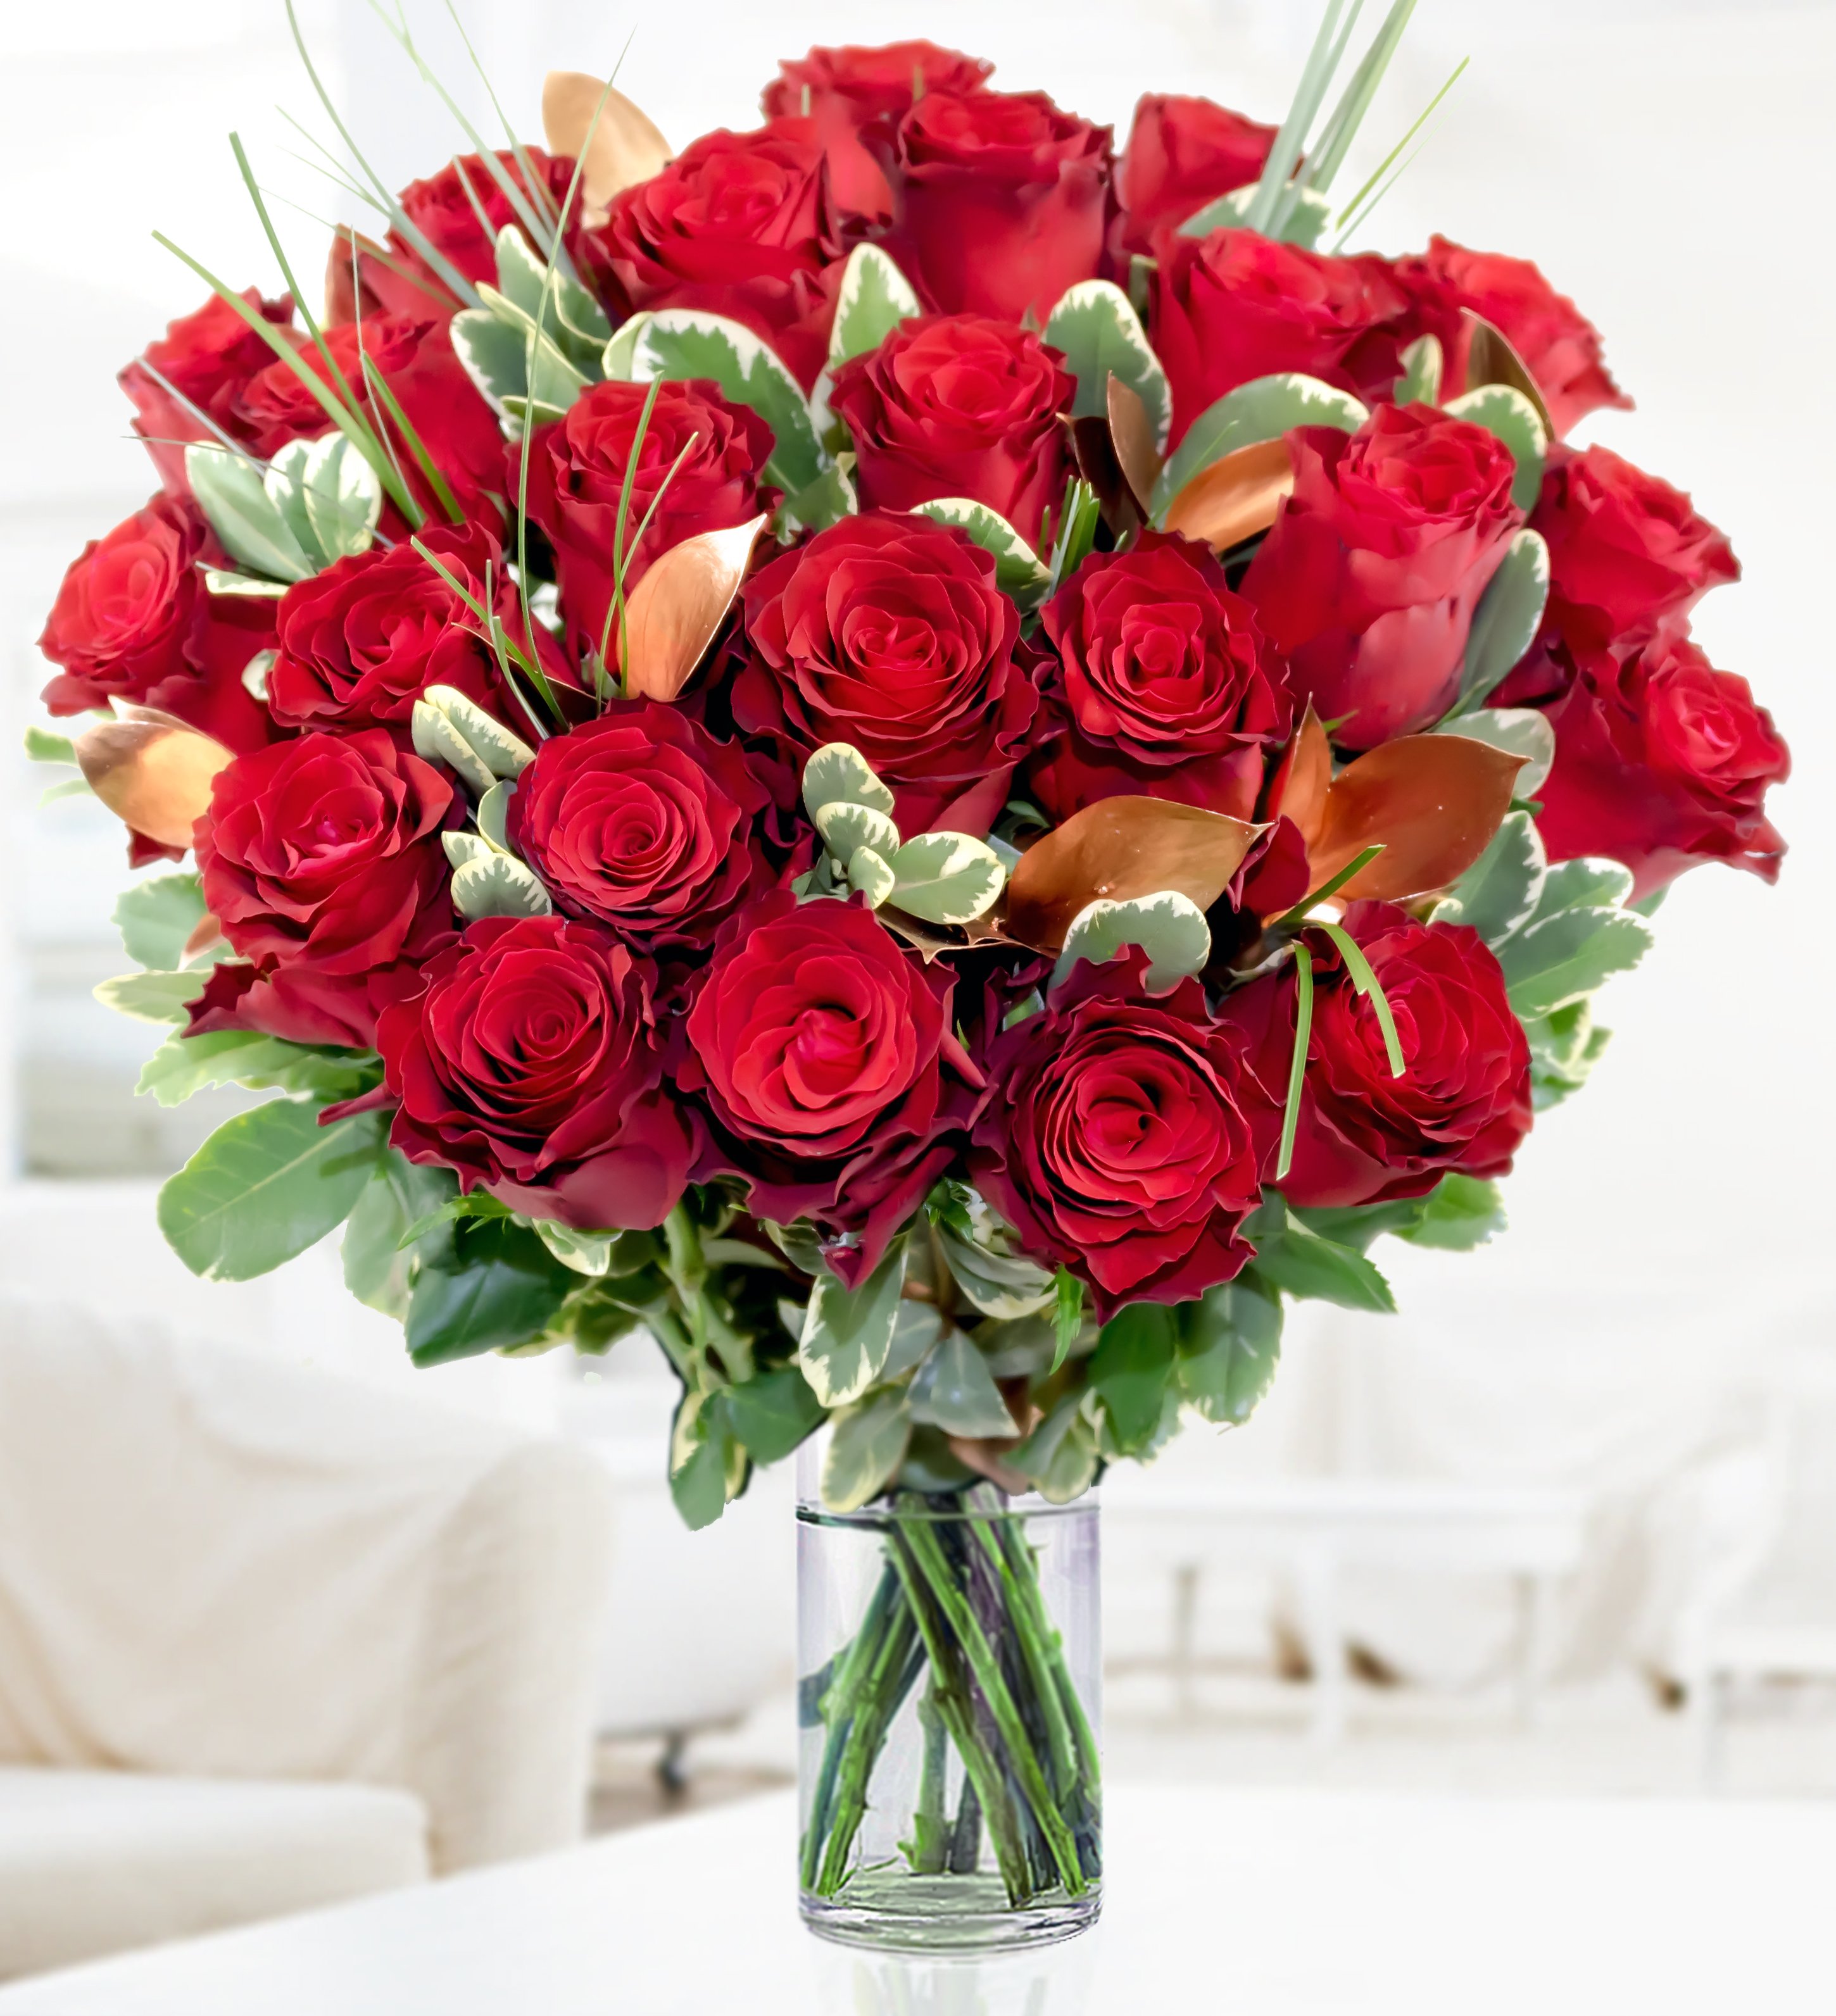 Romantic Valentine's Day flowers for your wife - Flower Press
